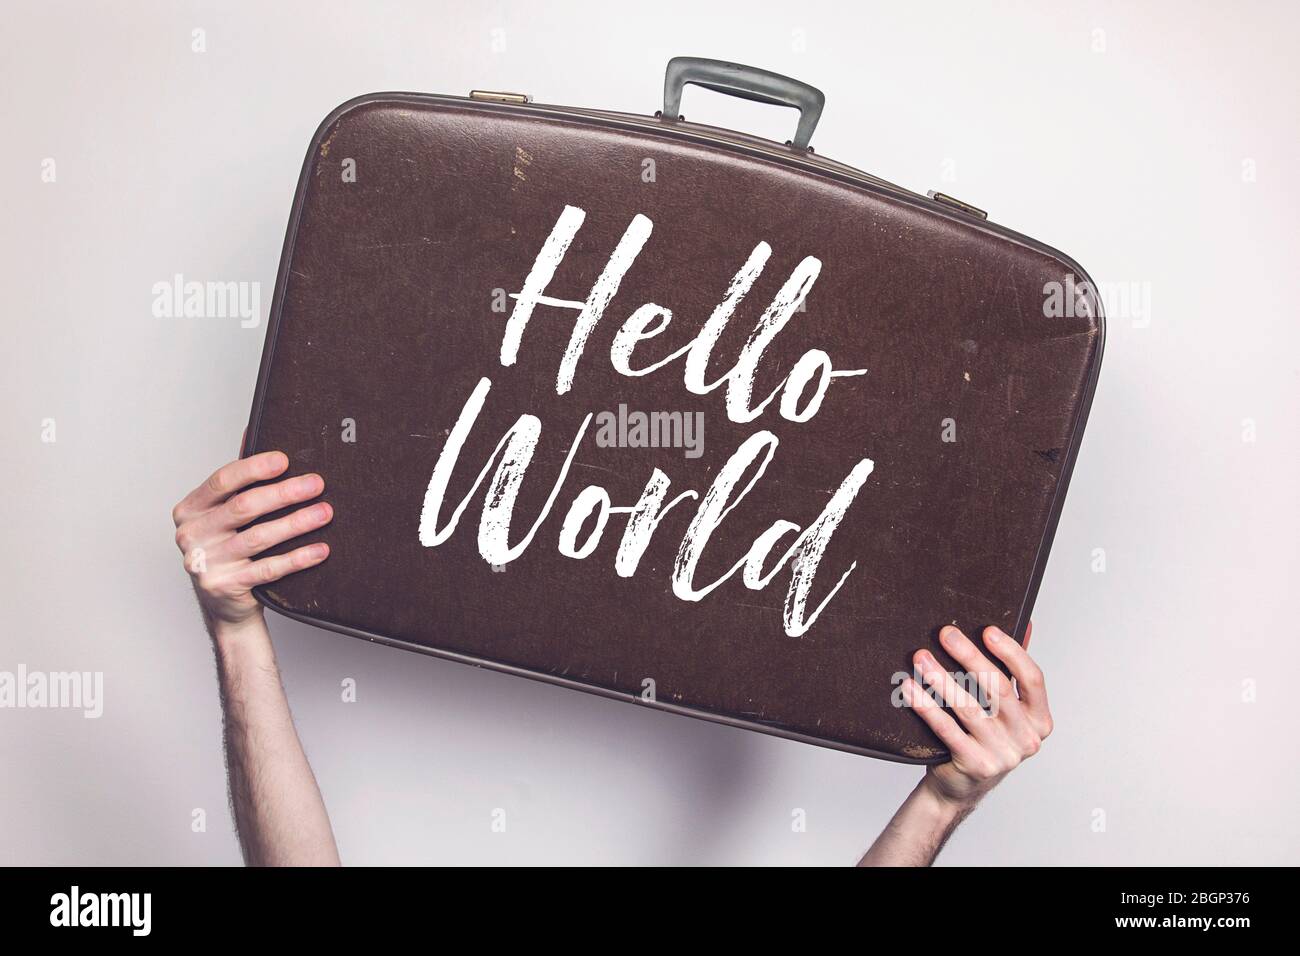 Hello World message on a vintage travel suitcase Stock Photo